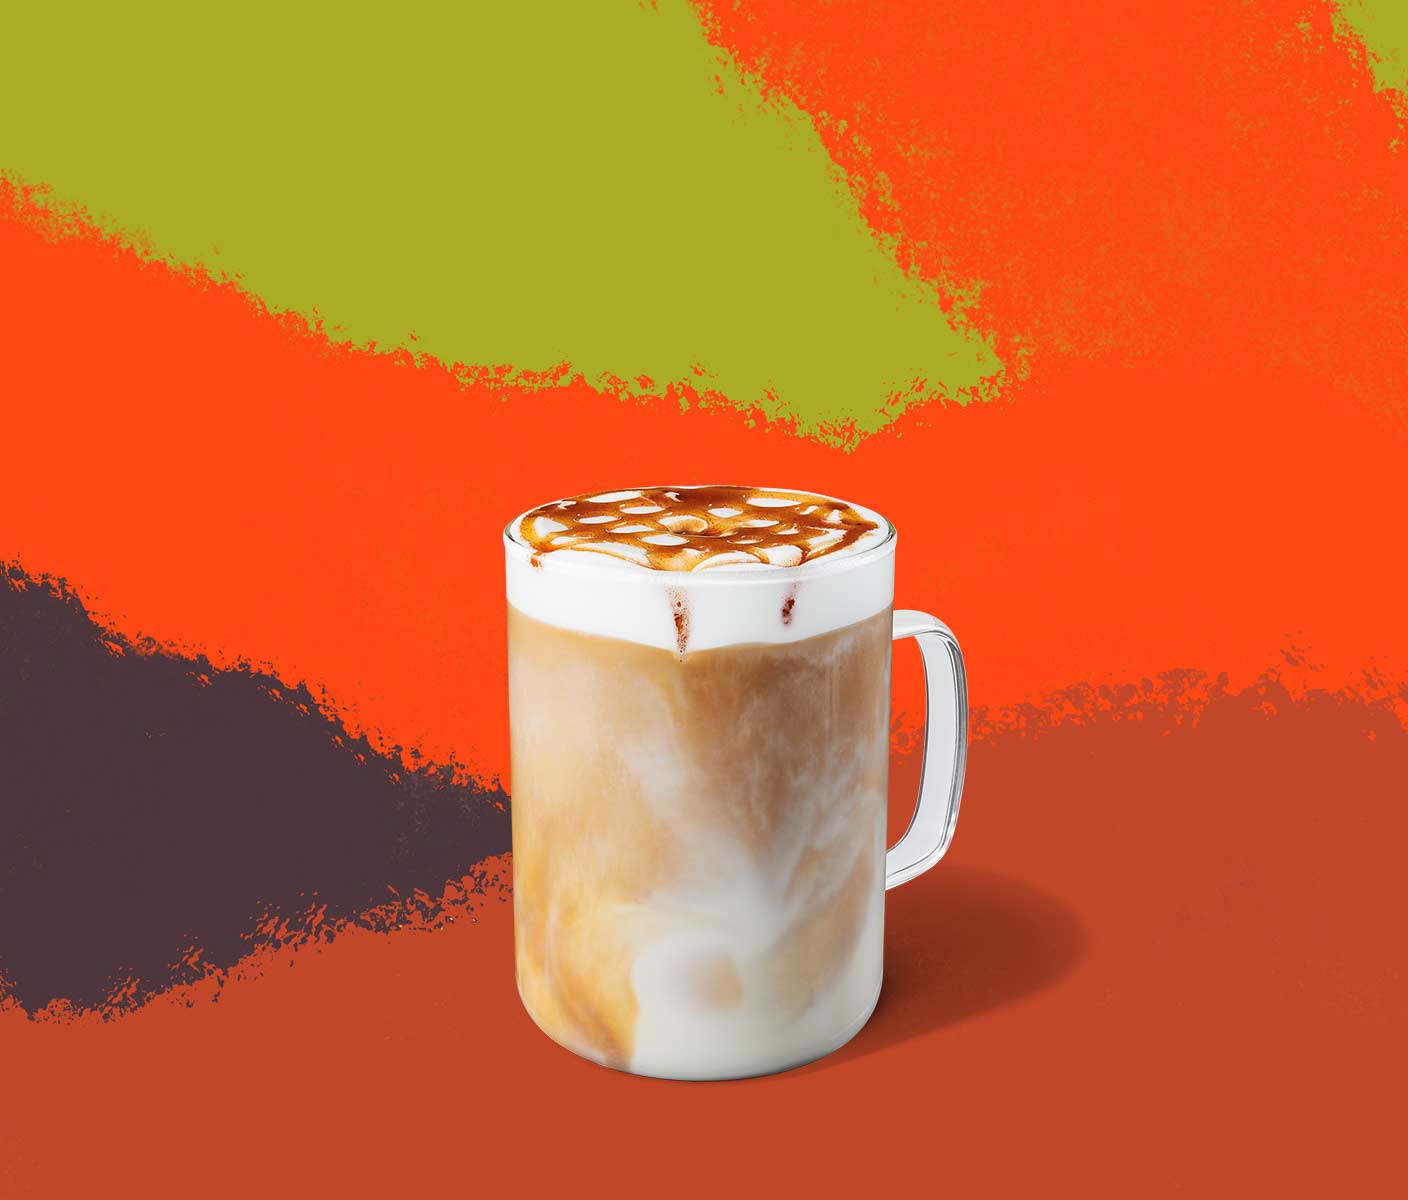 Hot, creamy coffee drink with foamy top and a crosshatch drizzle in a glass mug.